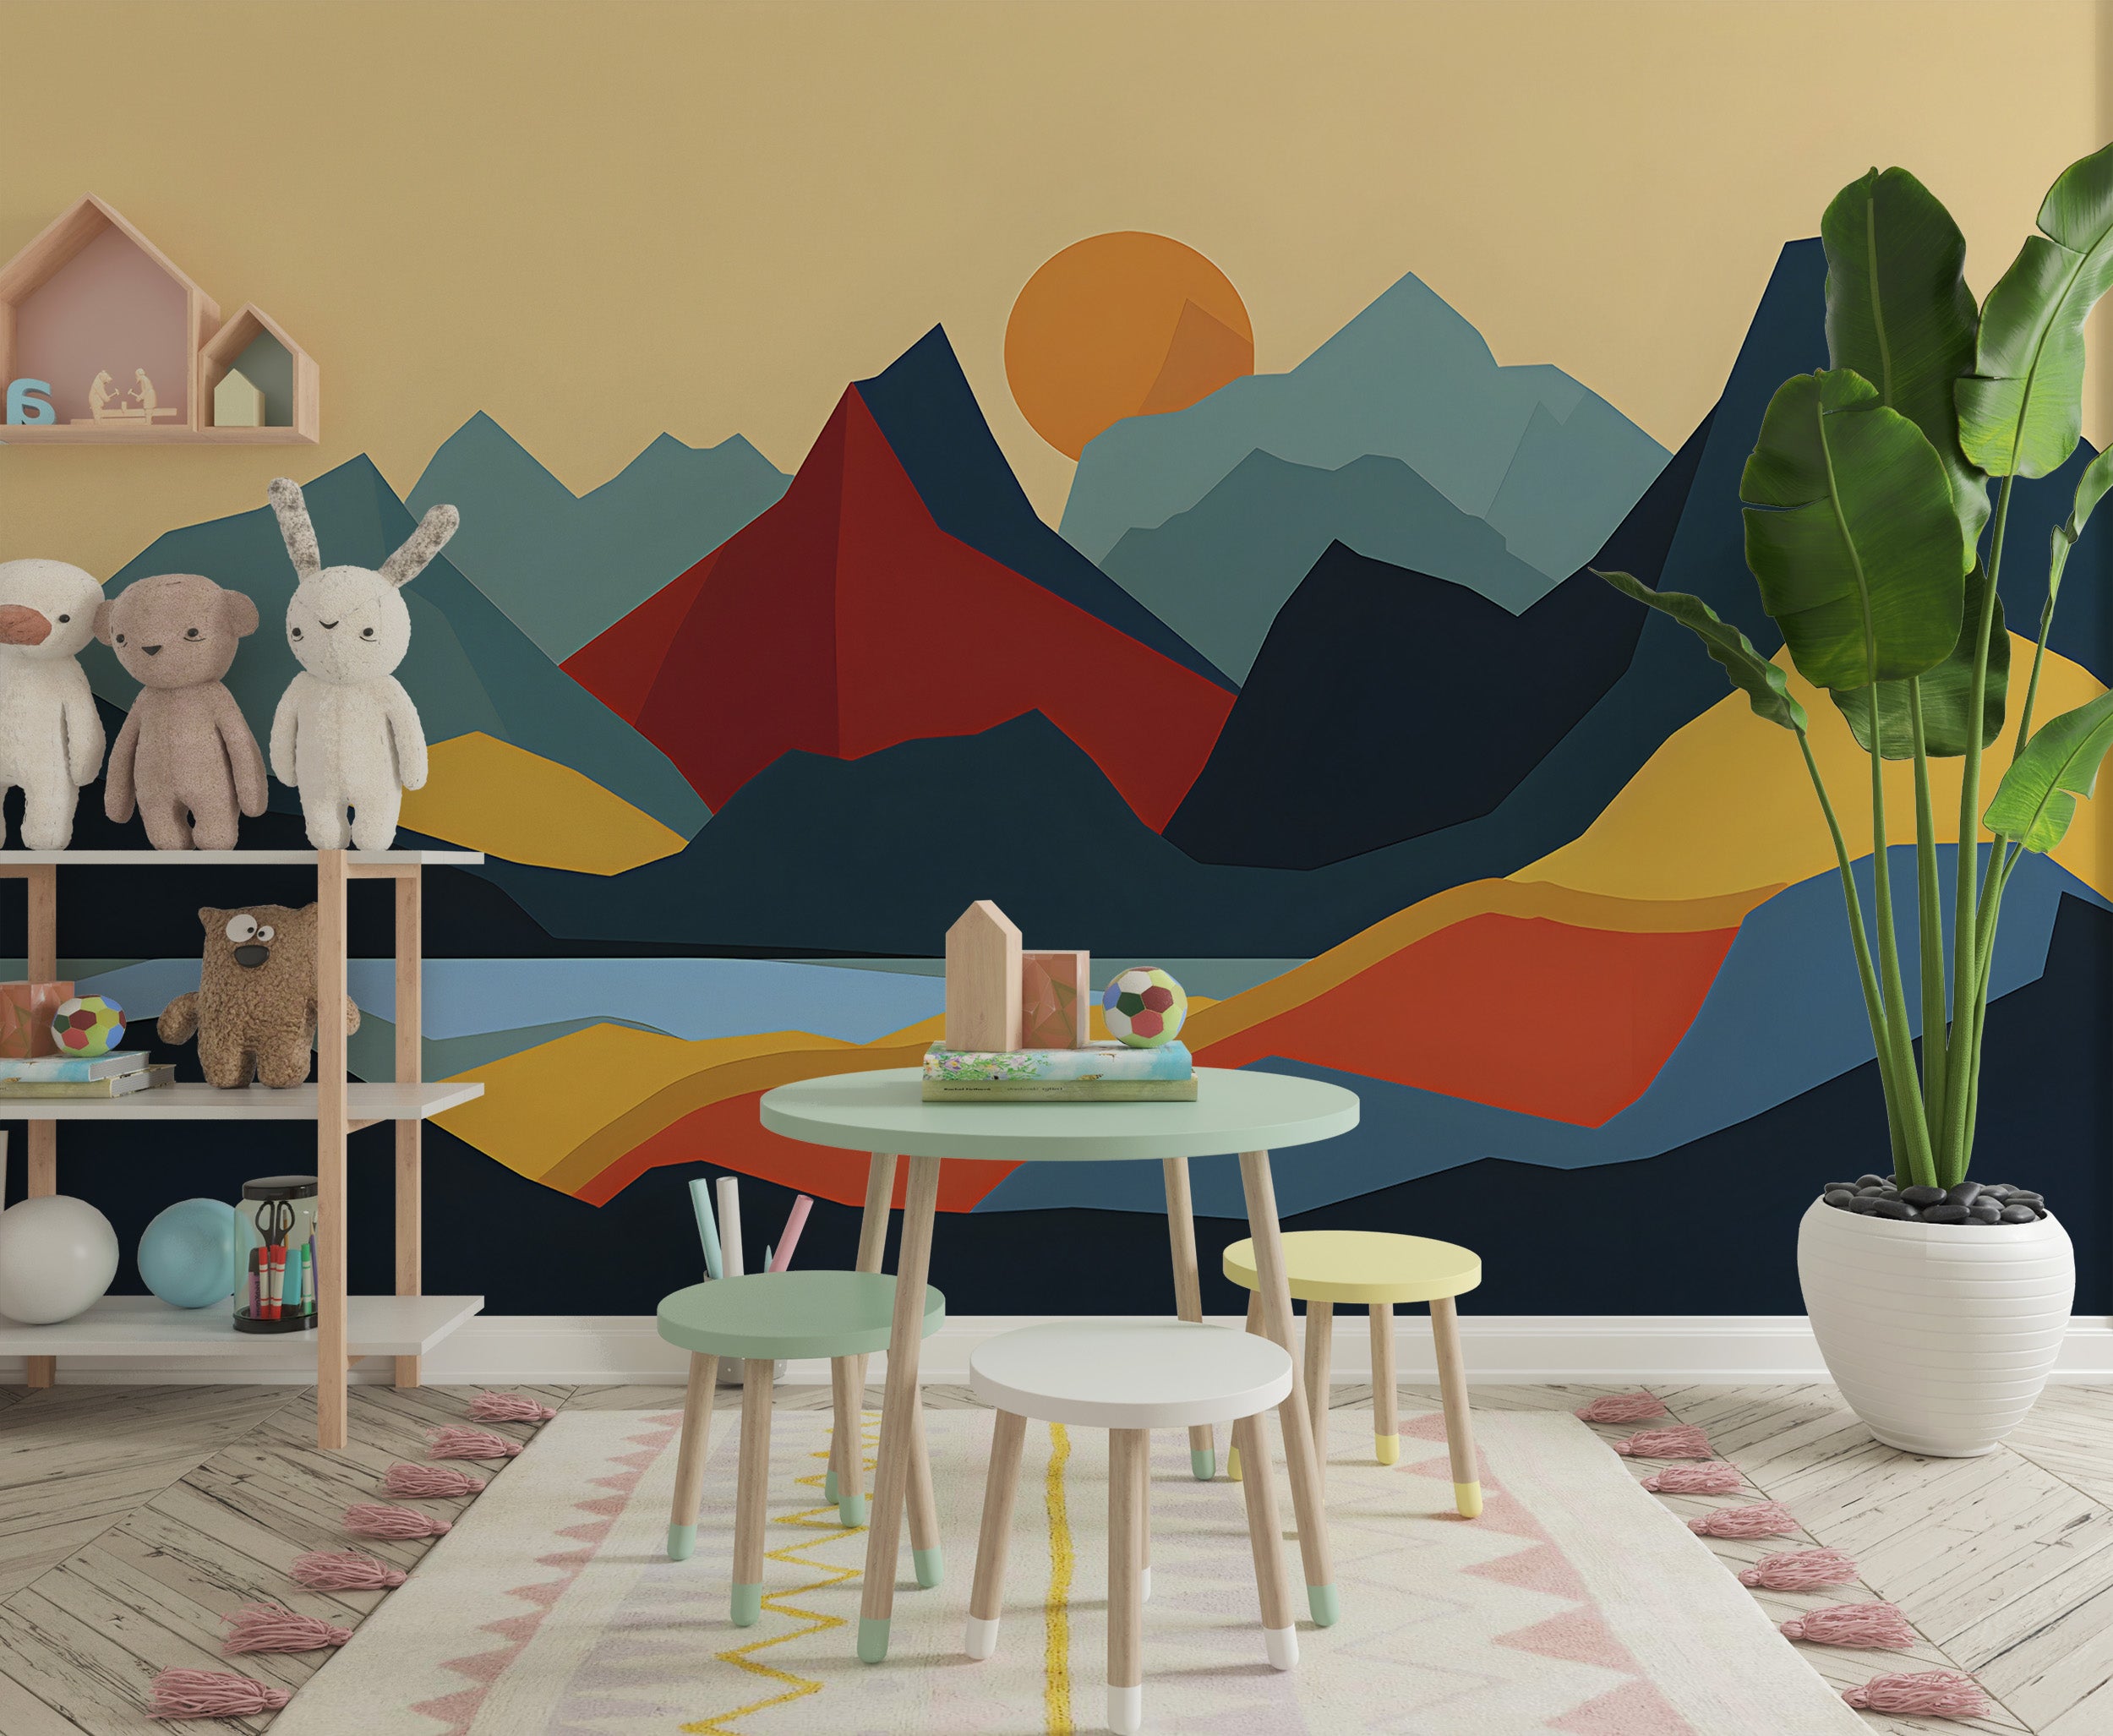 Colorful Cartoon Style Mountains Mural, Simple and Minimalistic Landscape Wallpaper, Peel and Stick Nursery Kids Room Abstract Nature Art Decal